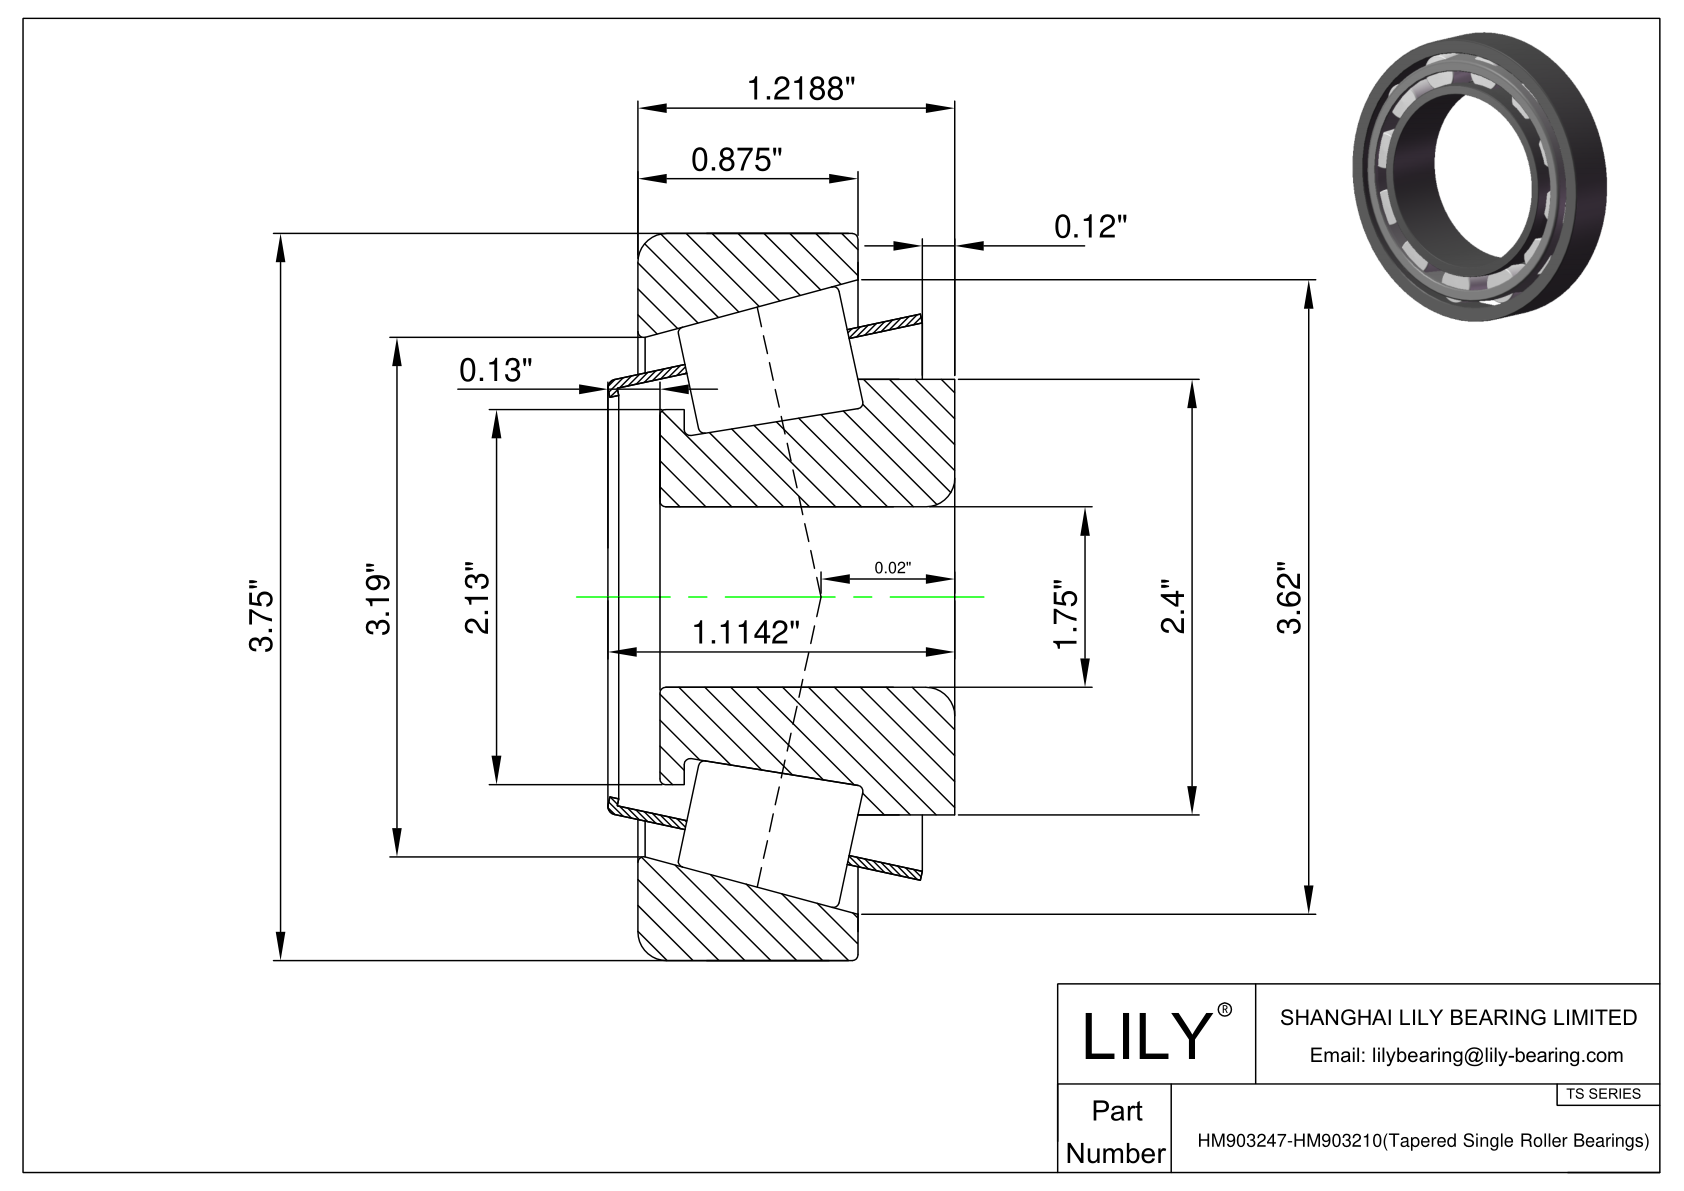 HM903247-HM903210 TS (Tapered Single Roller Bearings) (Imperial) cad drawing